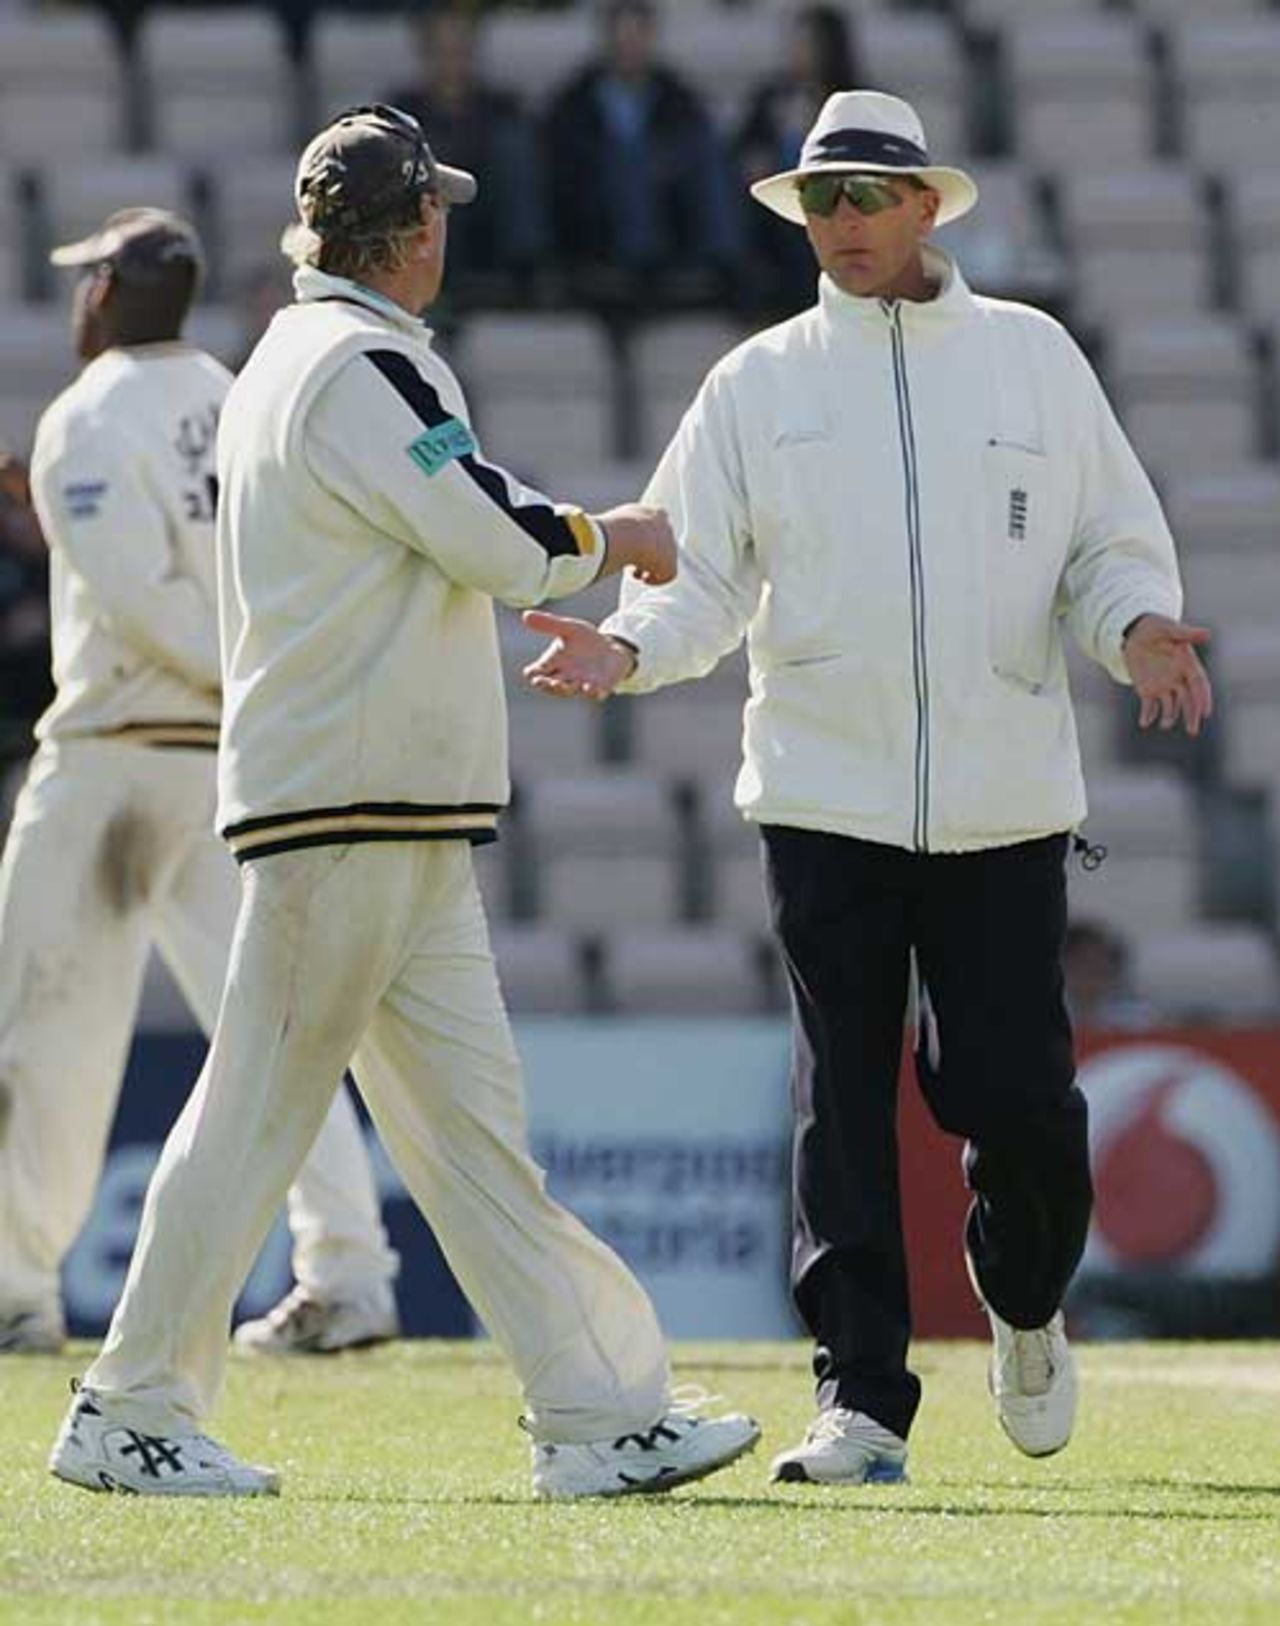 Shane Warne has a discussion with Neil Mallender as Lancashire all of the final day, Hampshire v Lancashire, The Rose Bowl, September 23, 2006